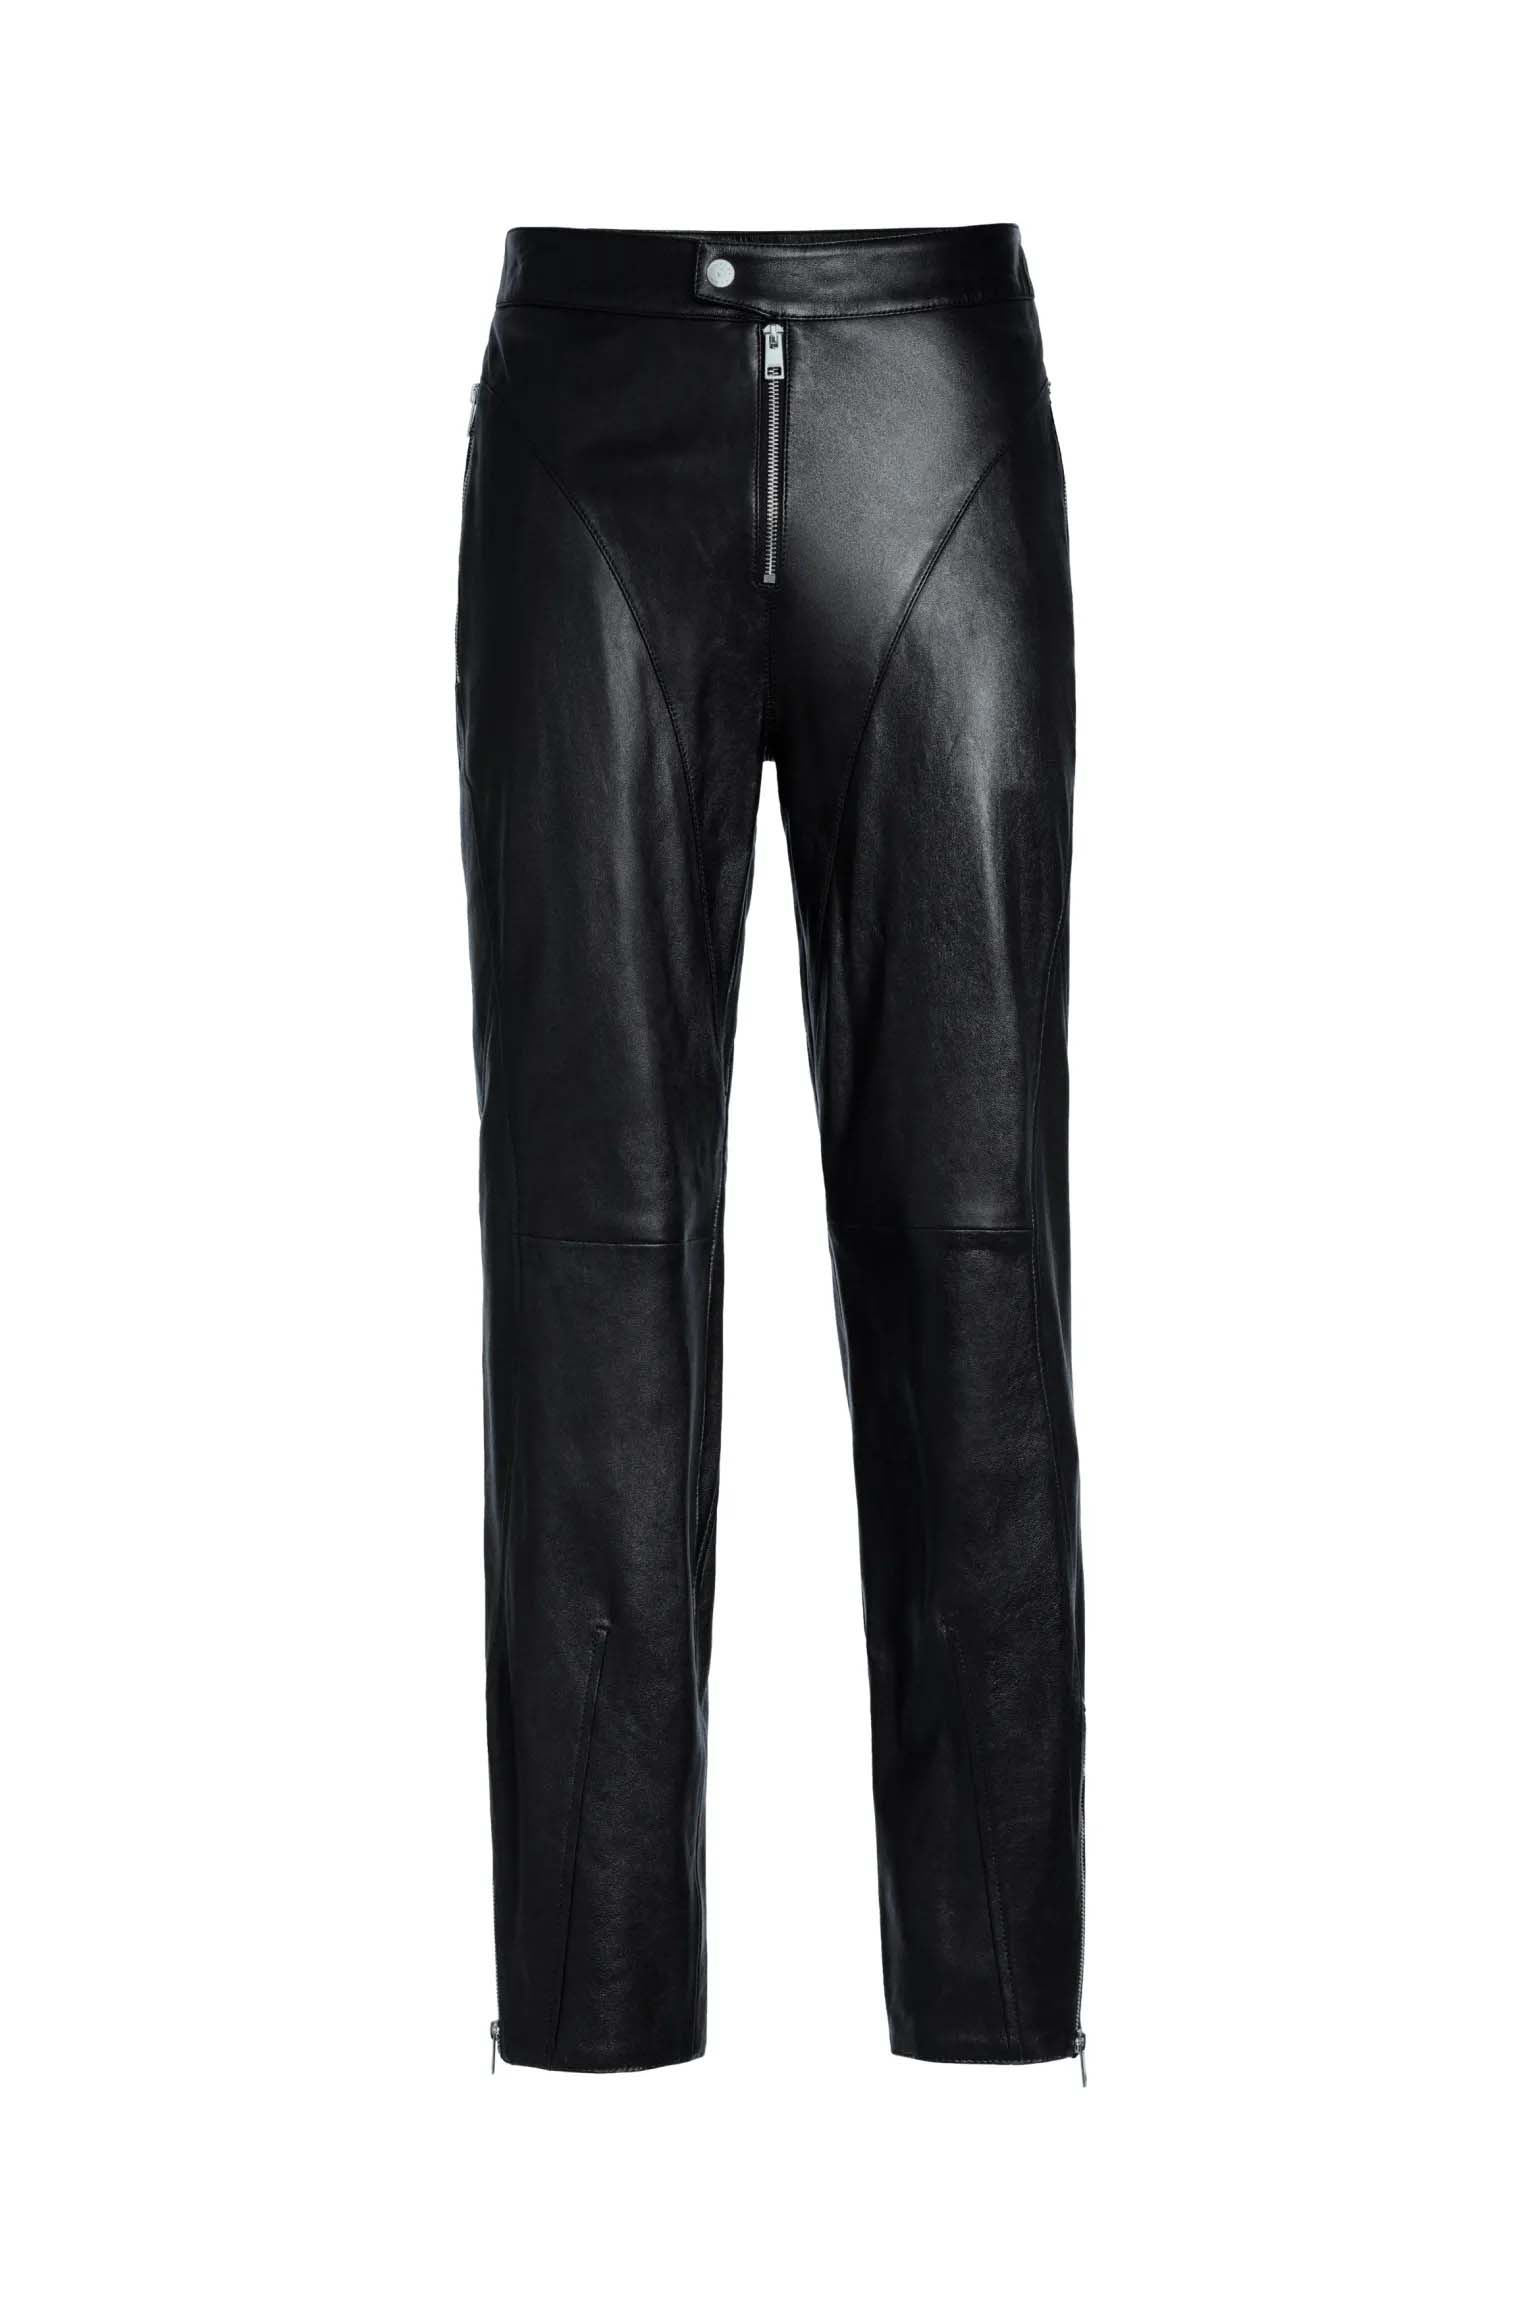 Explore Leather Motorcycle Motorbike Biker Trousers Touring Cruiser Jeans  With CE Armour  Bike Wear Direct